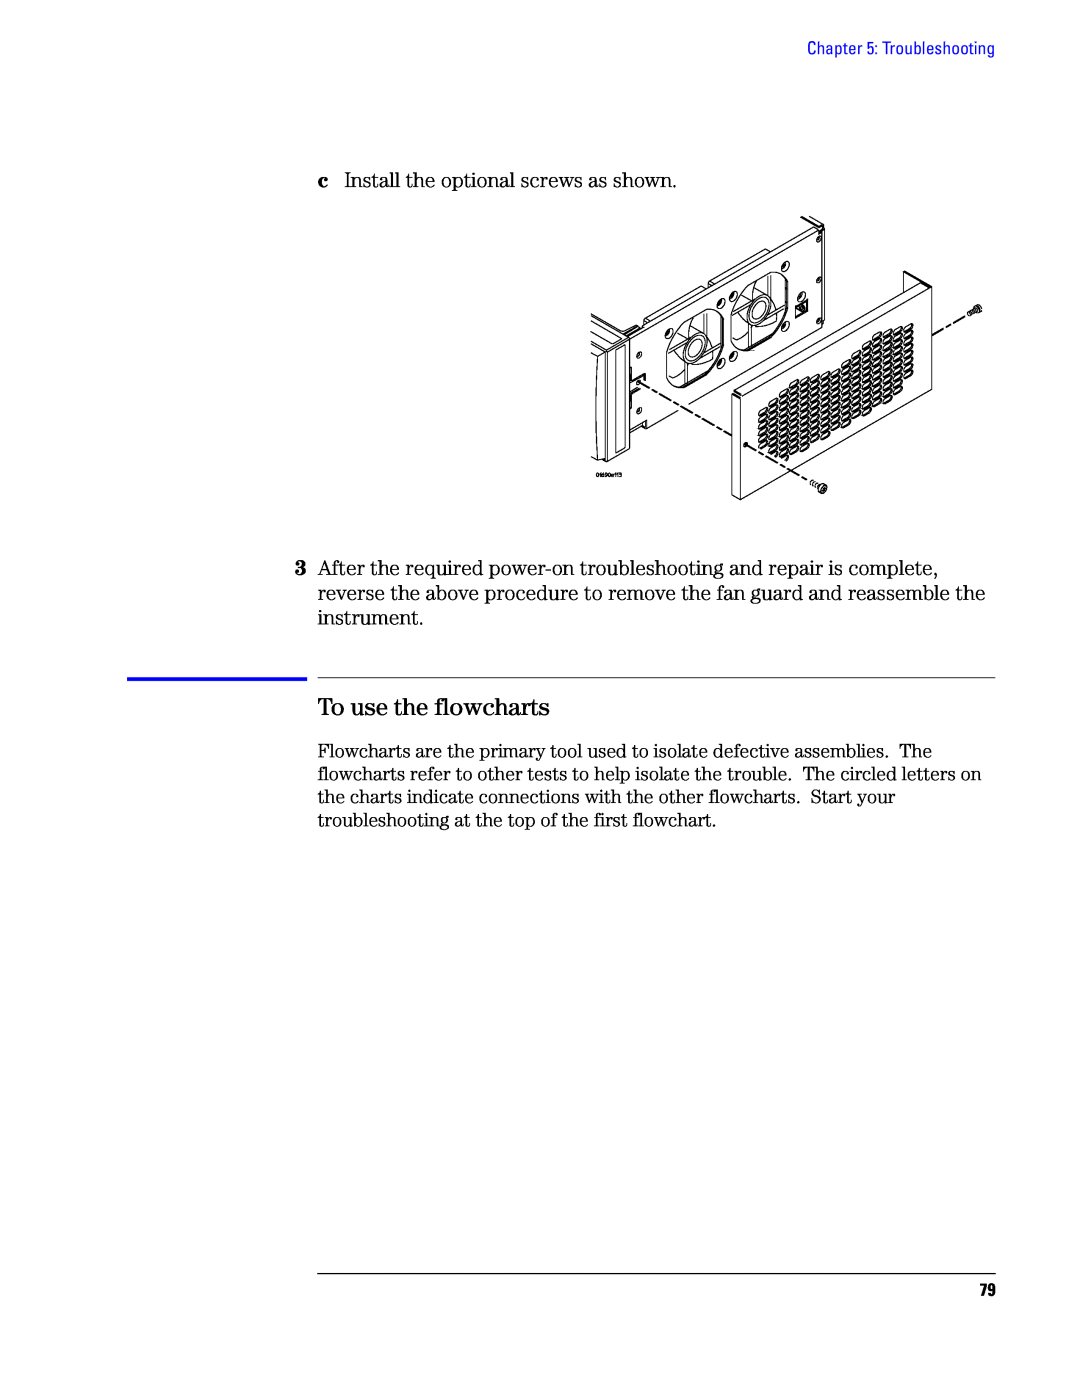 Agilent Technologies 1690, 1680 manual To use the flowcharts, c Install the optional screws as shown 